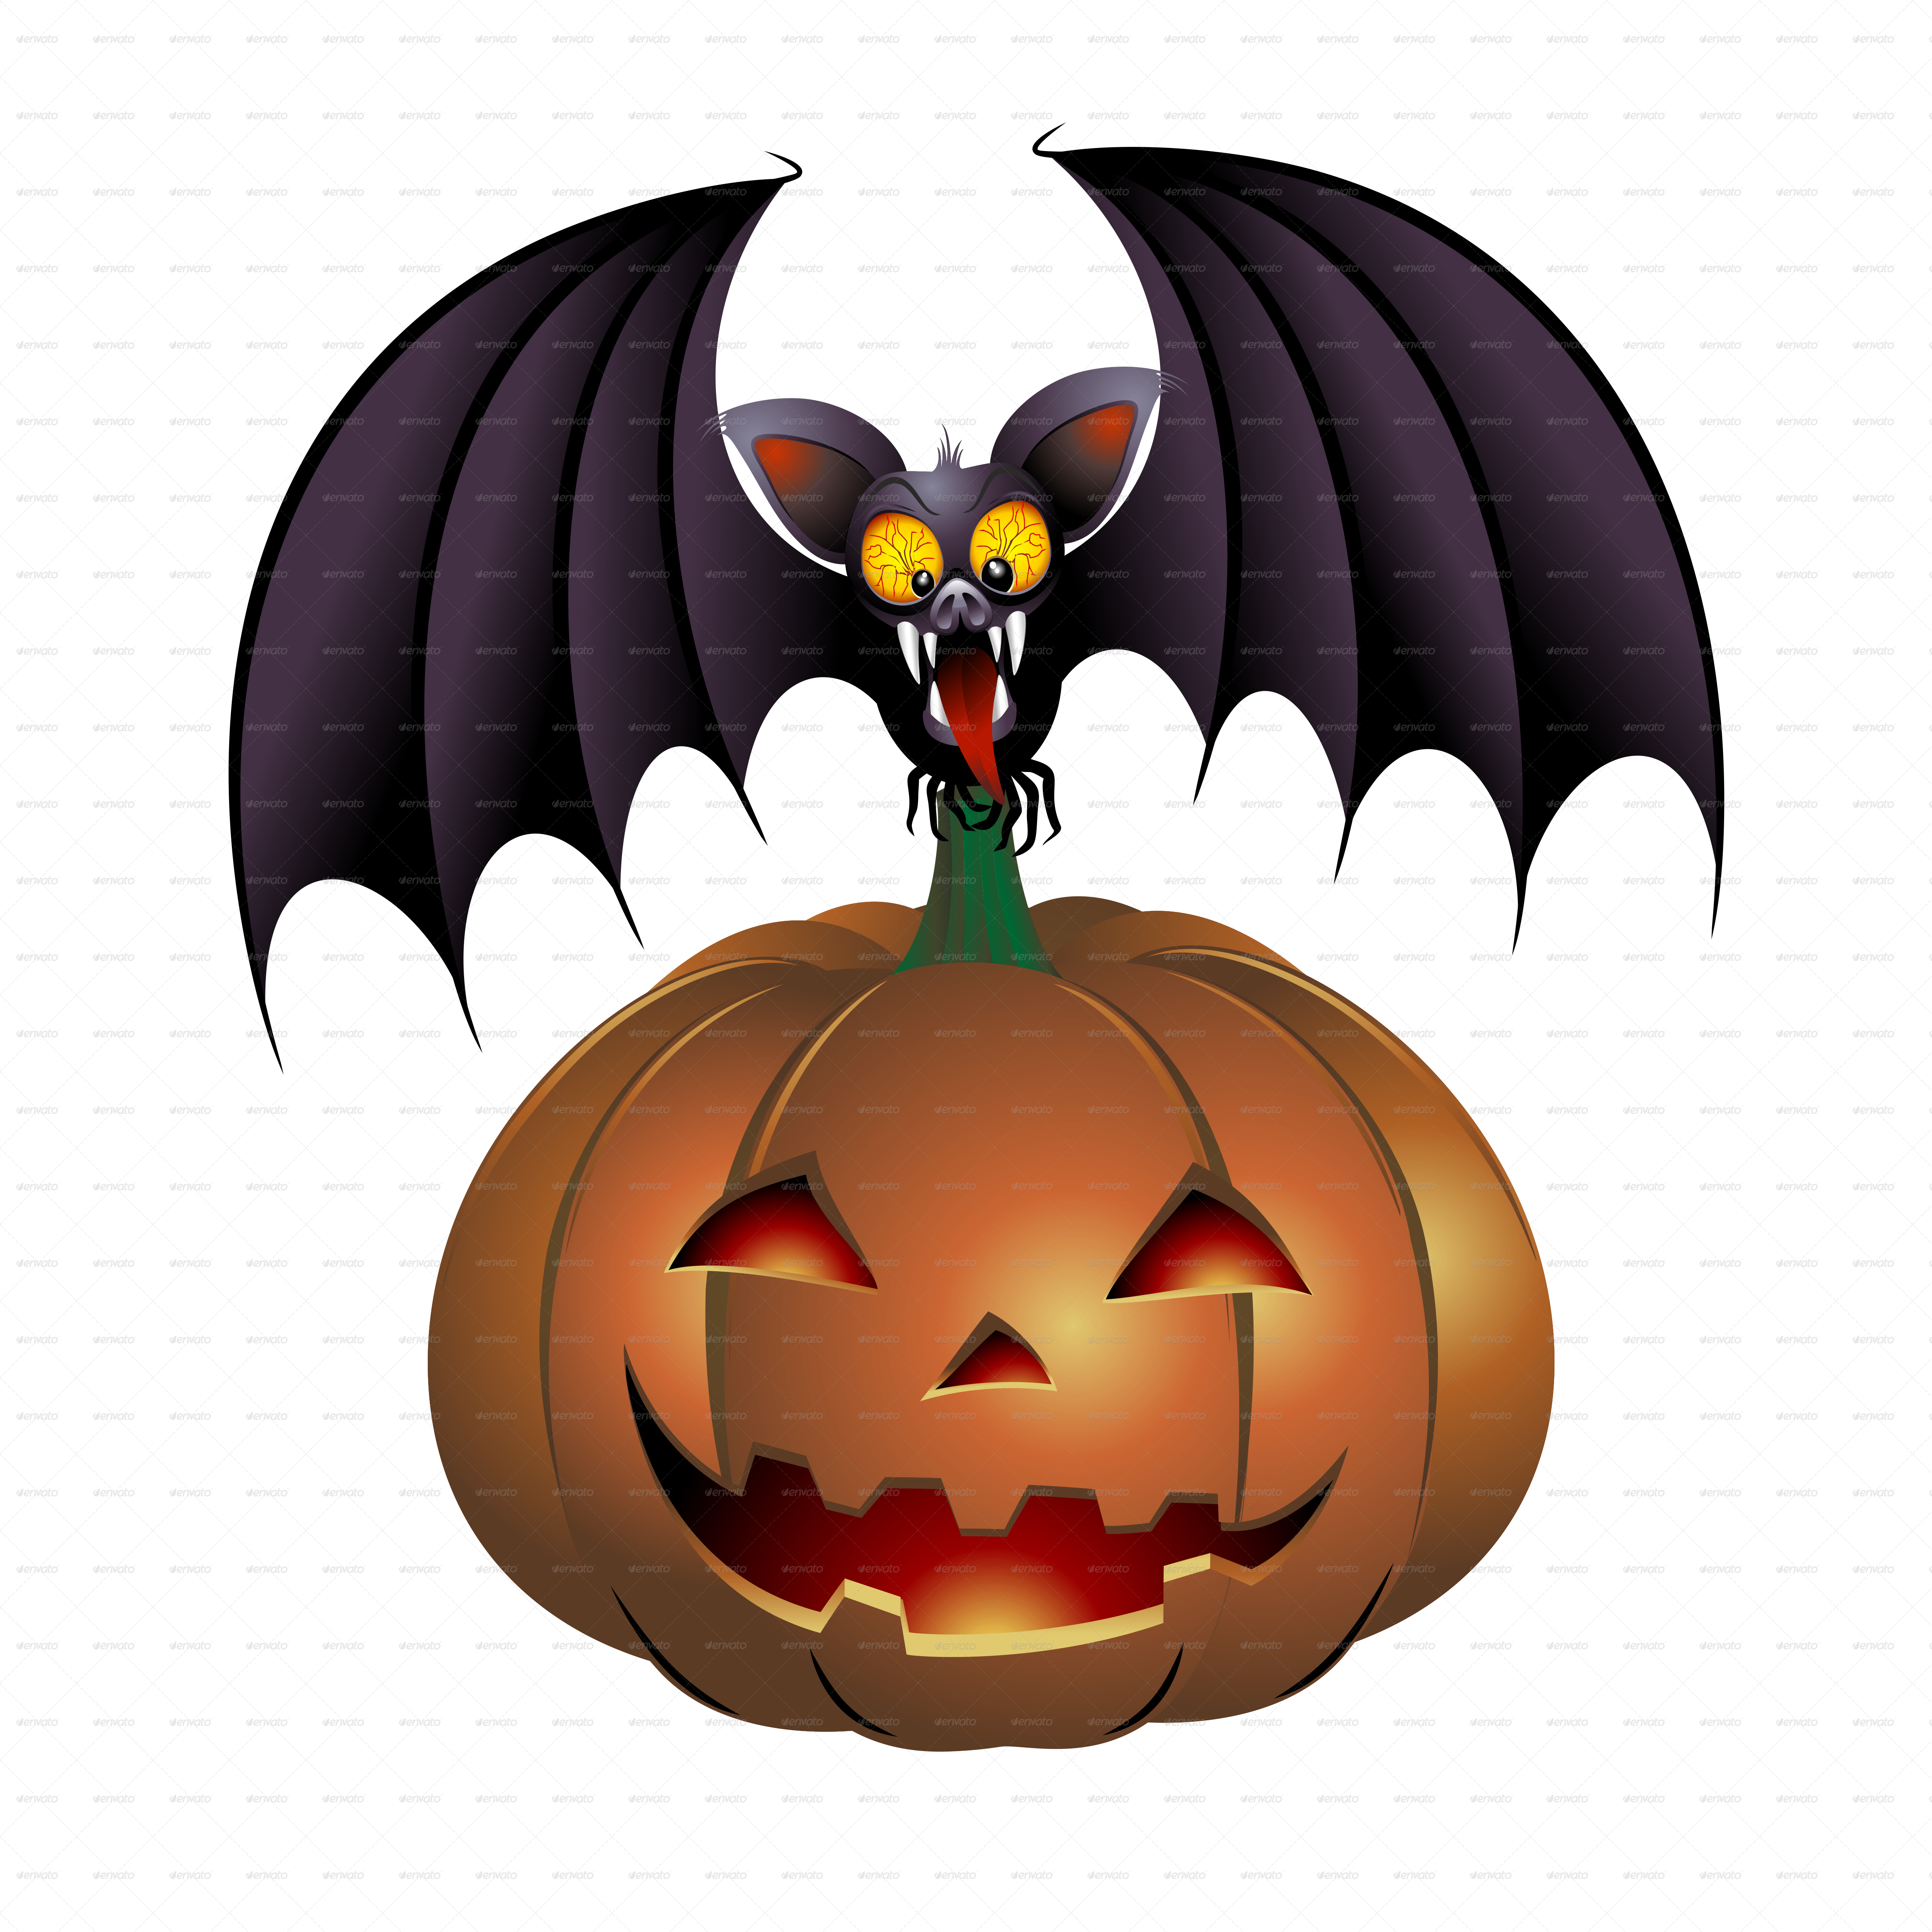 Halloween Gifs Clipart Images, Free Download